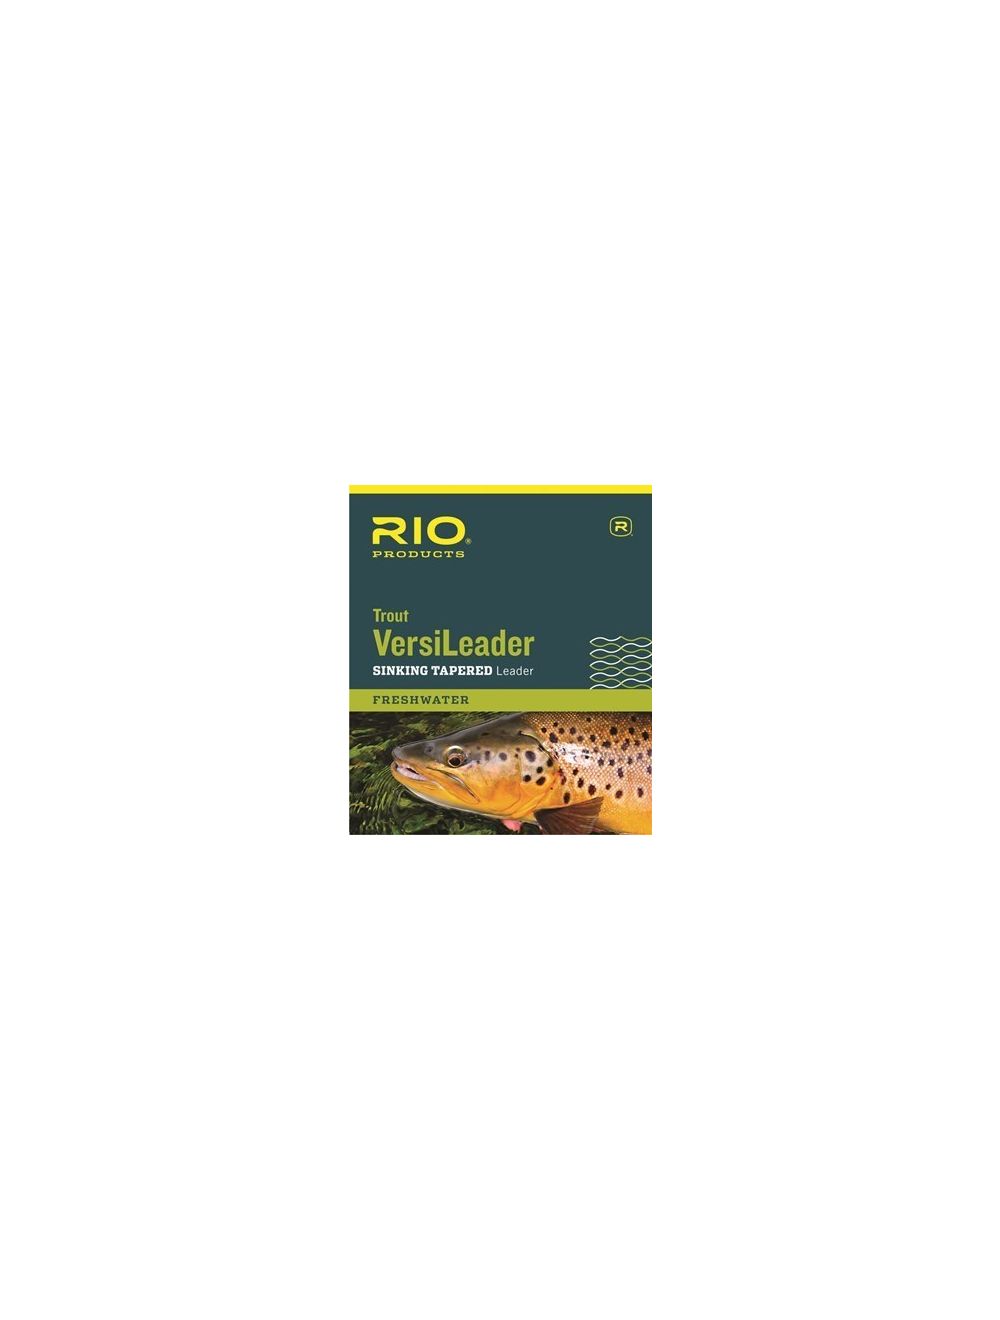 RIO Trout Versileader Fly Fishing Leader All Sinking Rates Up To 6 IPS 12lb  7ft